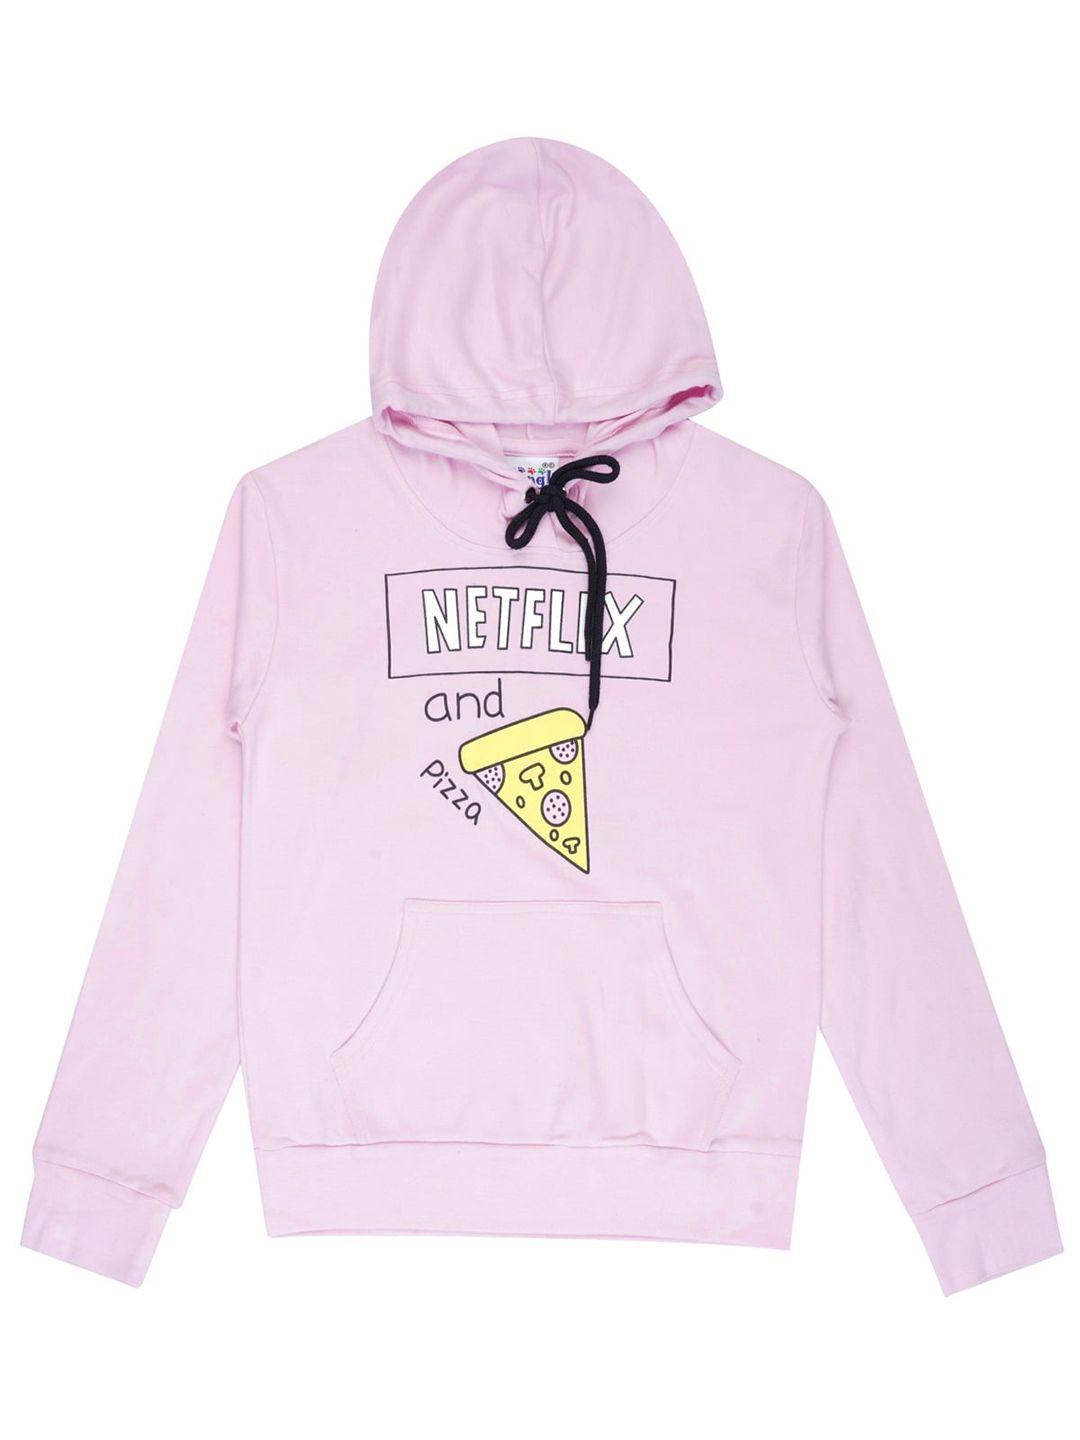 dongli boys graphic printed hooded pullover sweatshirt